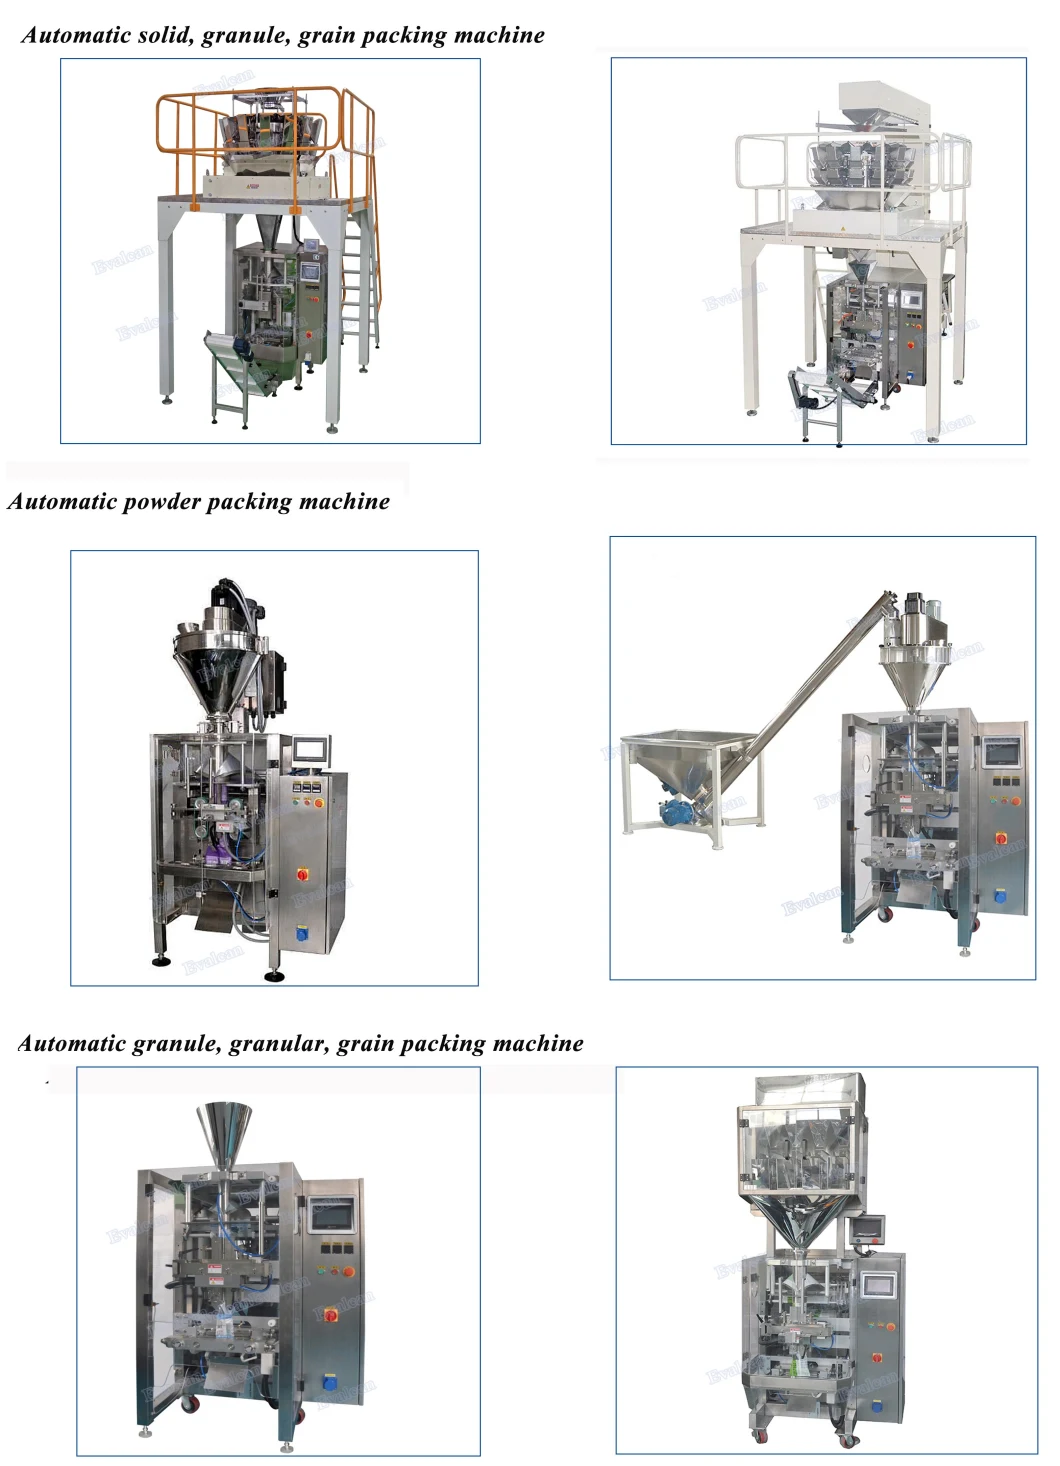 Automatic Granule, Grain Packing Machine with Multihead Weigher